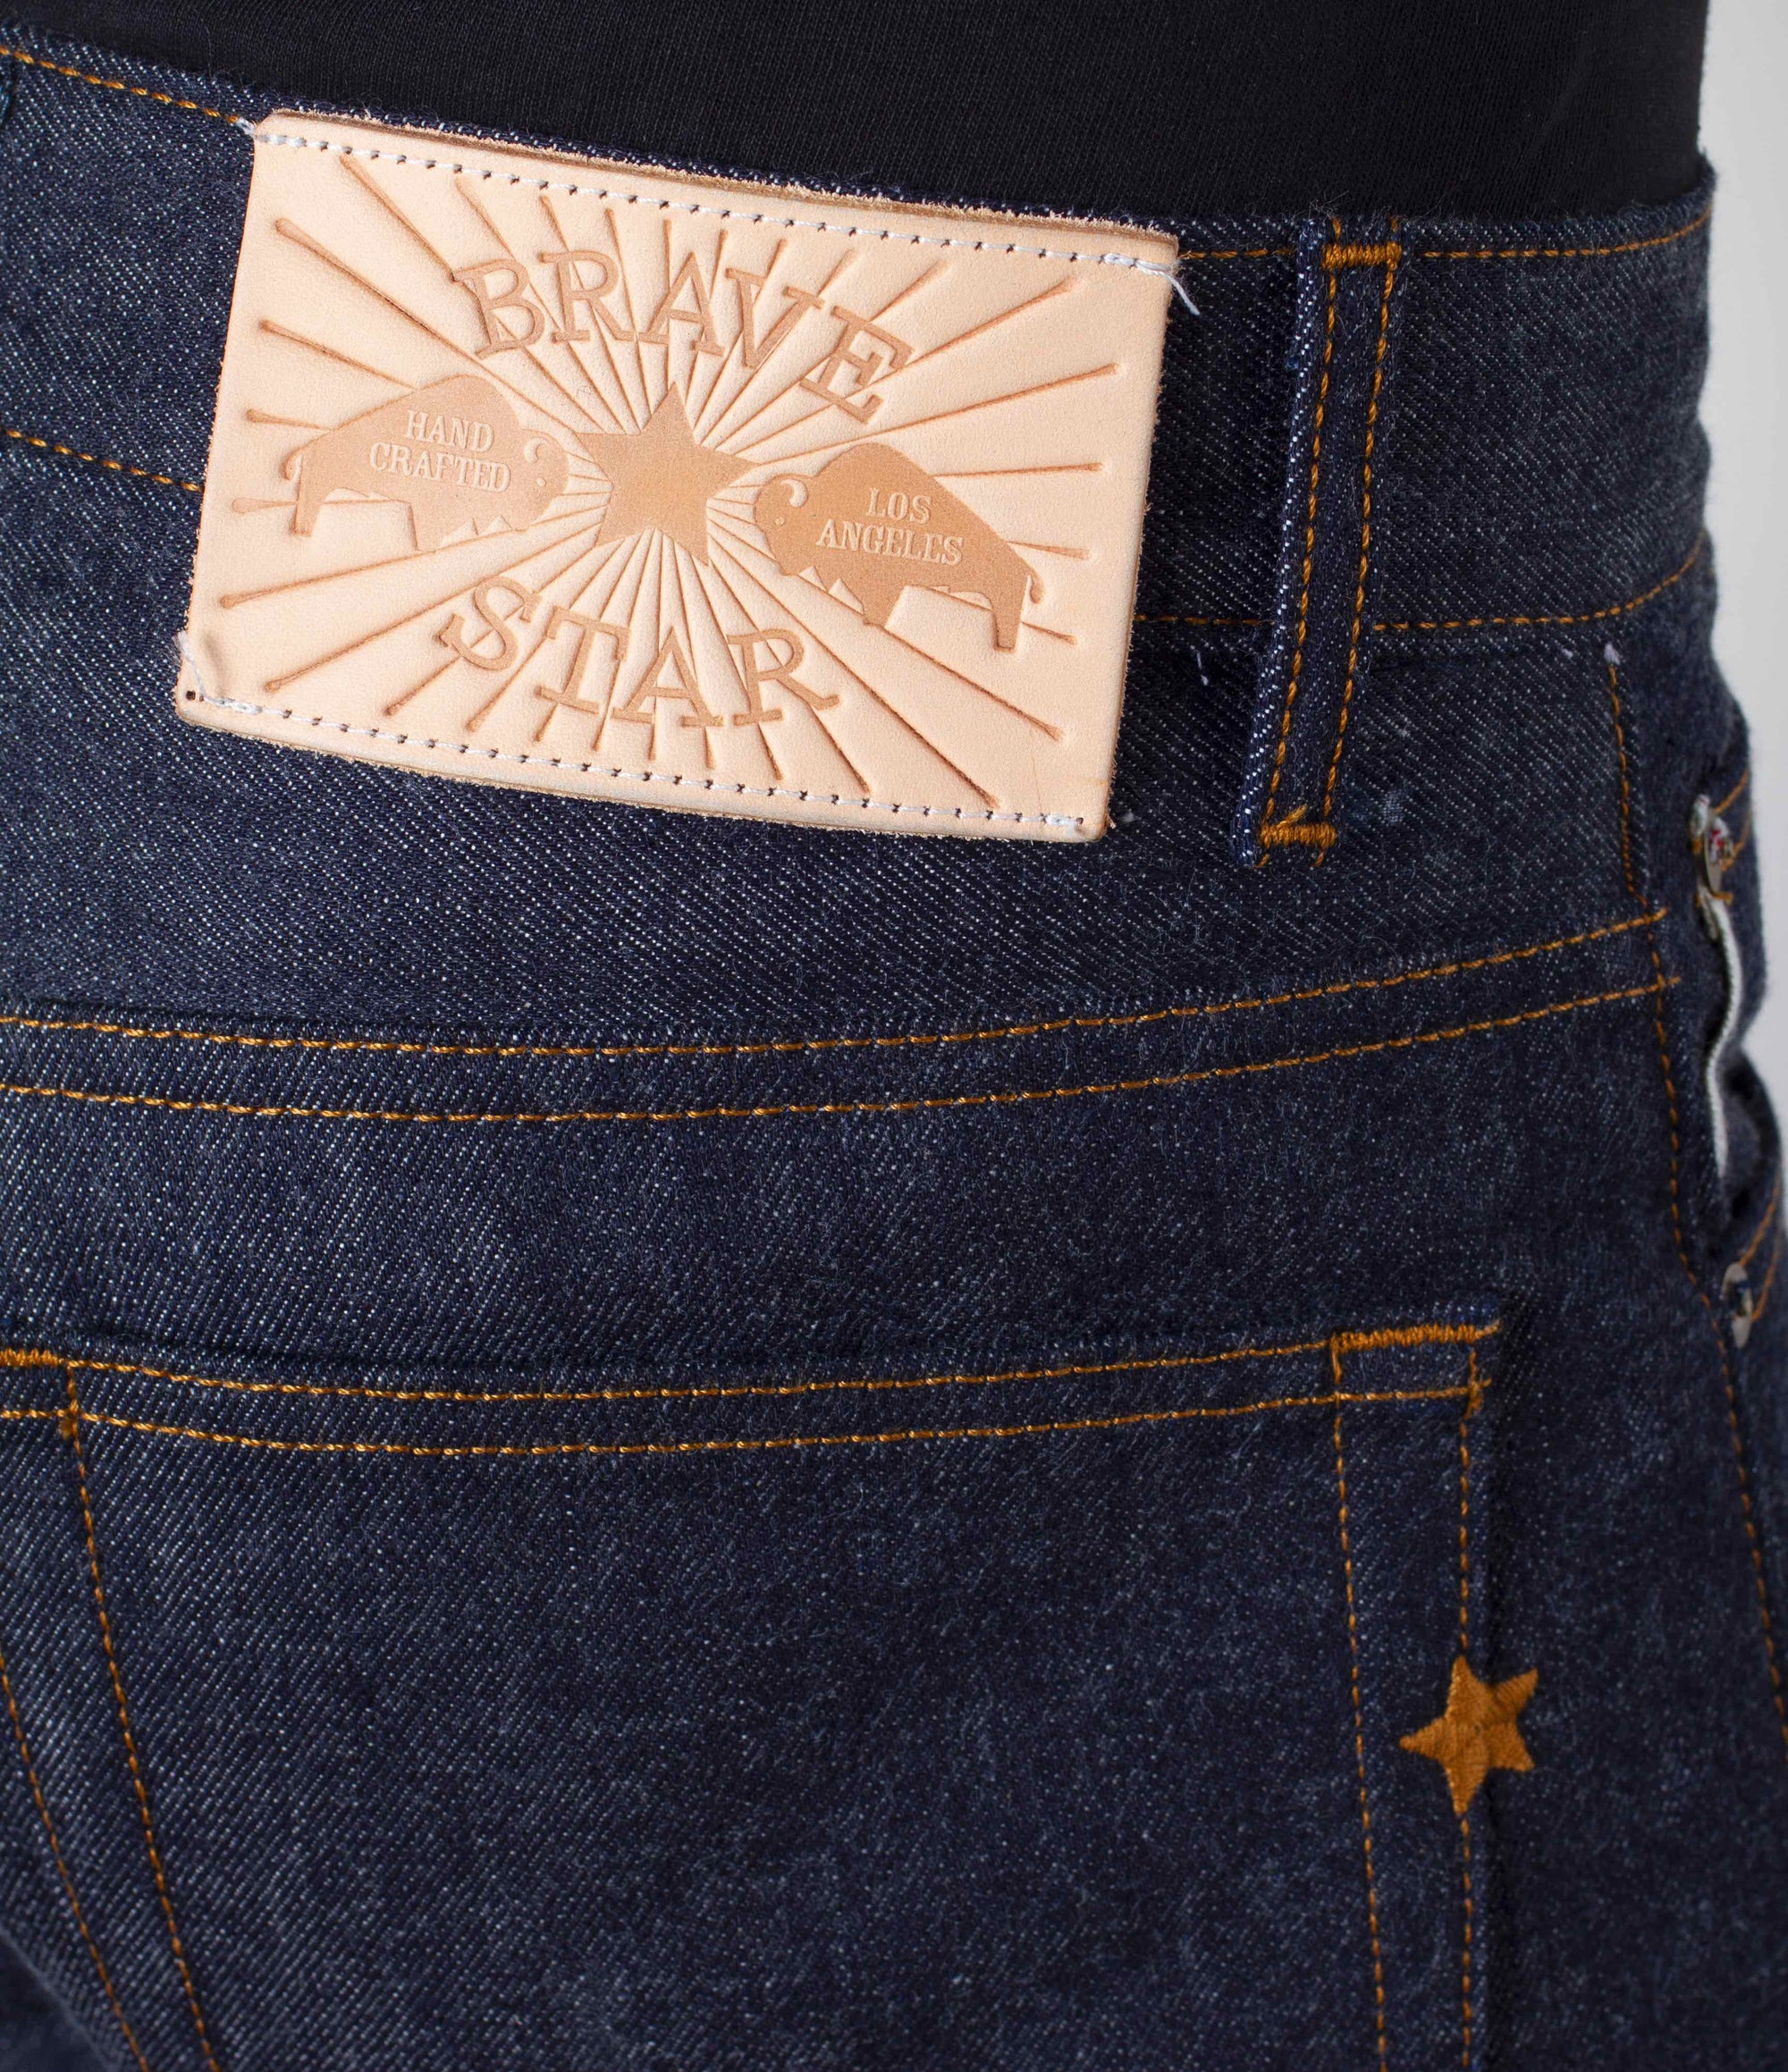 Brave Star The True Straight 12oz Kaihara Grey Selvage Denim Size 42 - $111  New With Tags - From Bambi